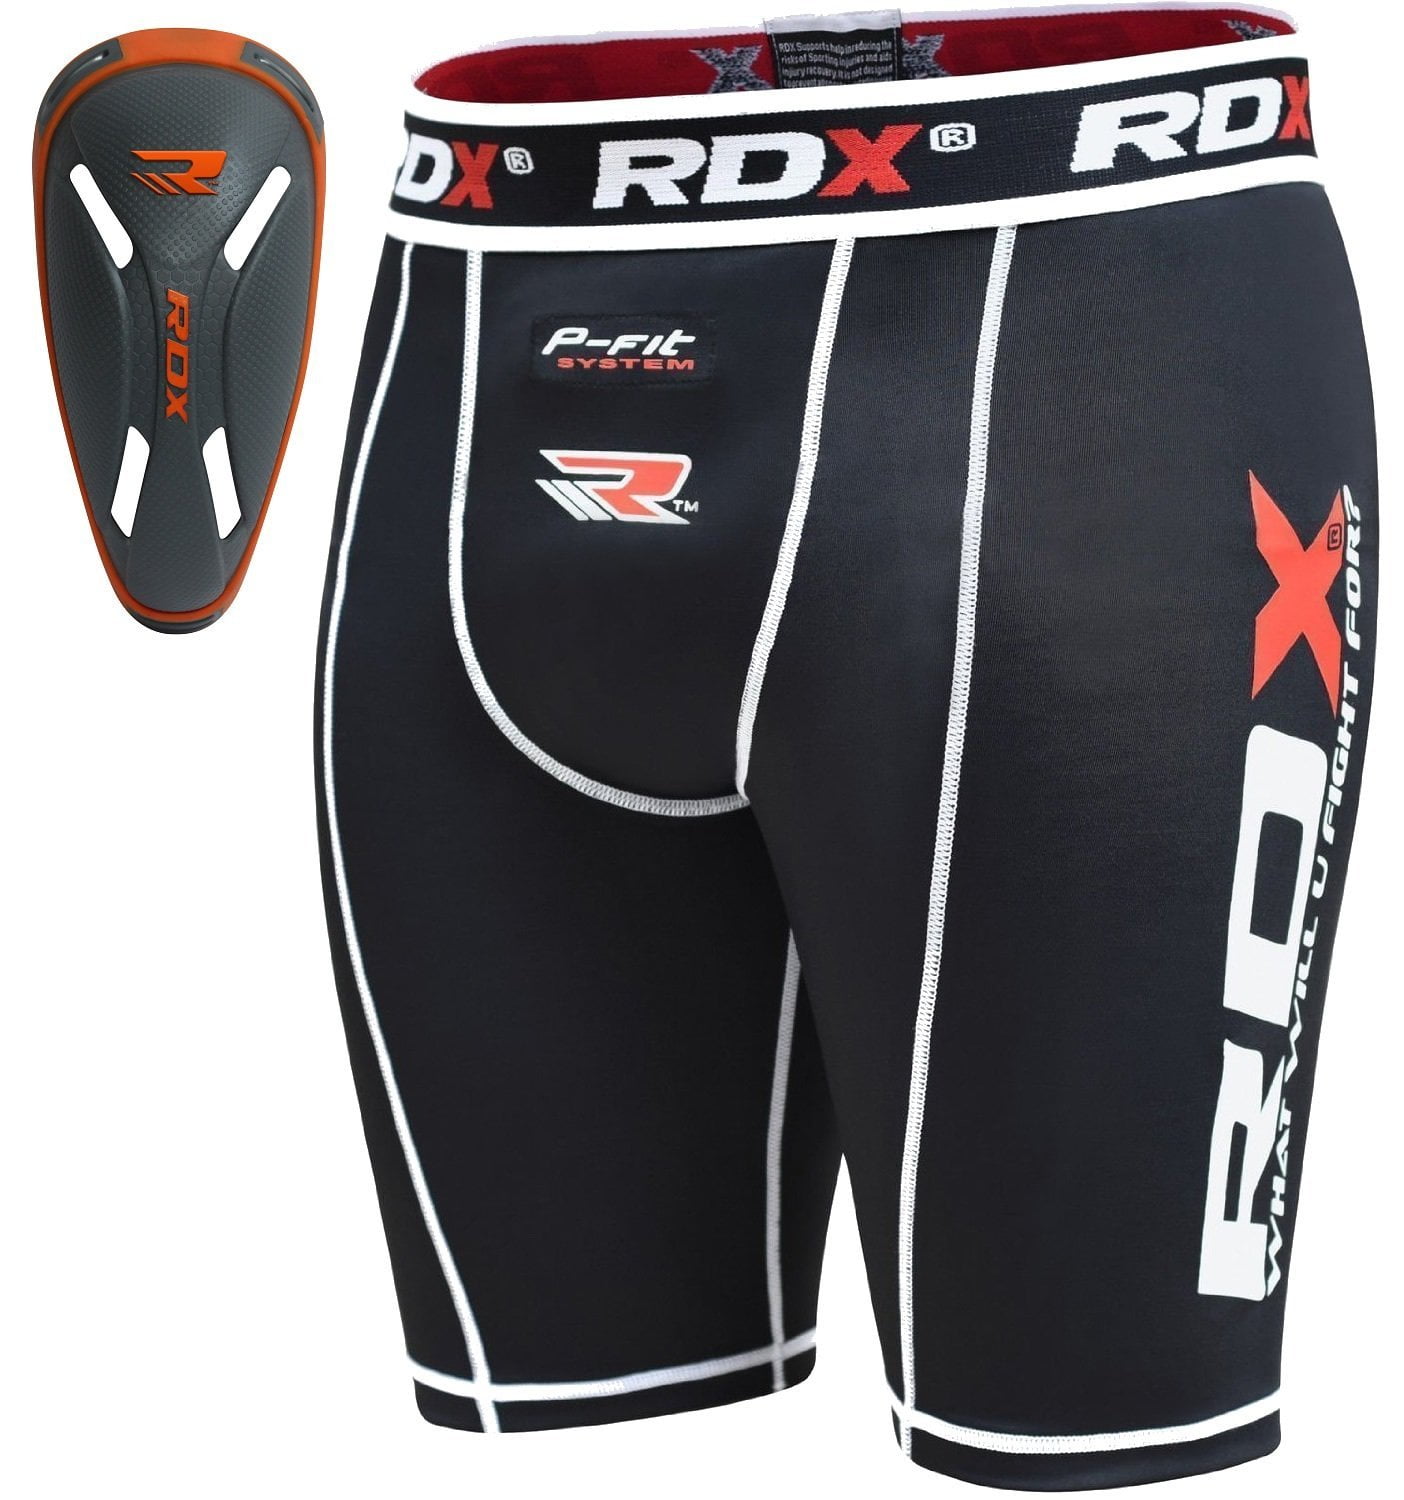 RDX MMA Mens Thermal Compression Shorts Groin Cup Boxing Training Guard Base Layer Fitness Running Exercise